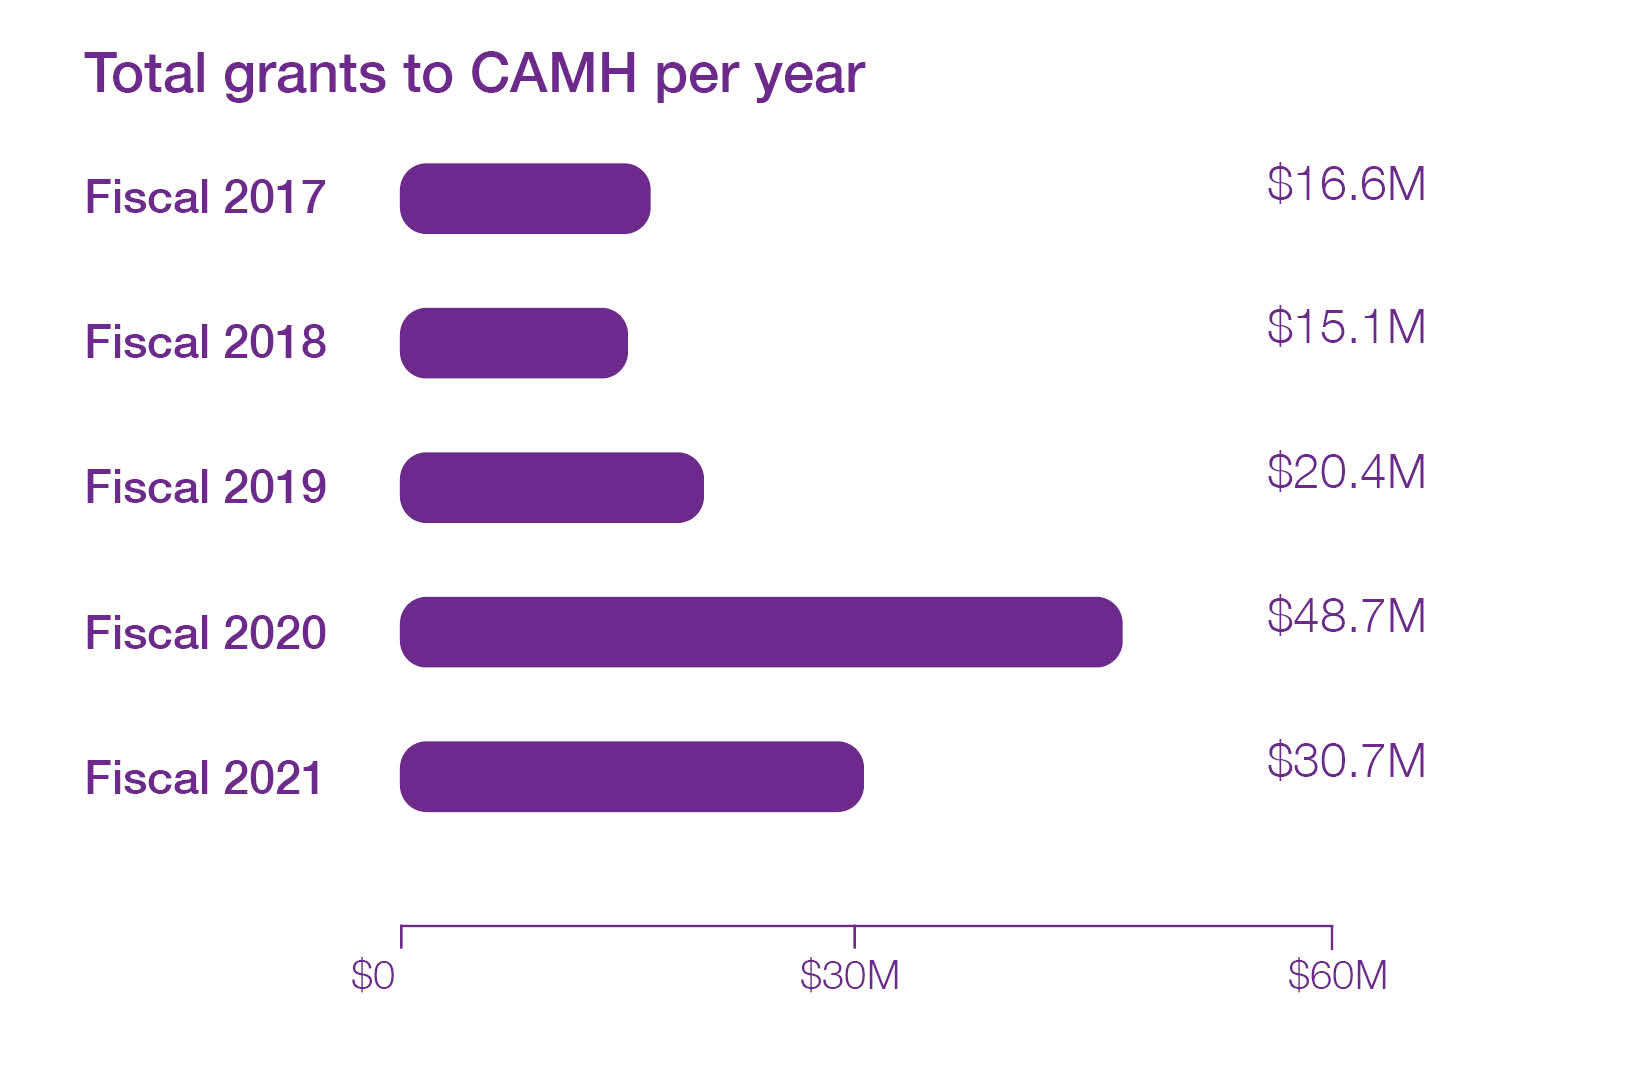 Foundation grants to CAMH Year over Year